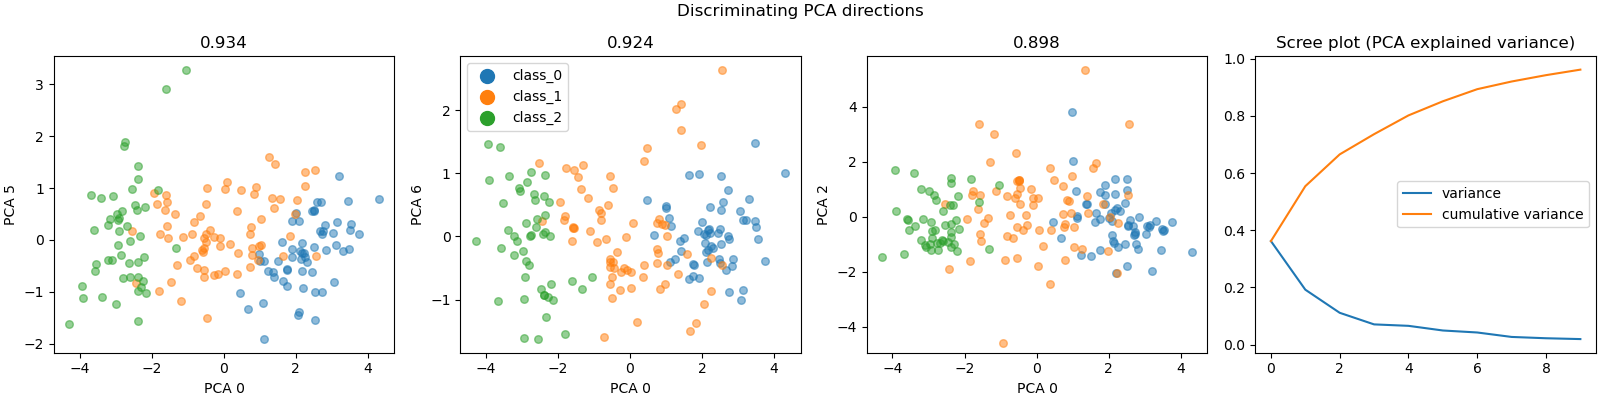 Discriminating PCA directions, 0.934, 0.924, 0.898, Scree plot (PCA explained variance)